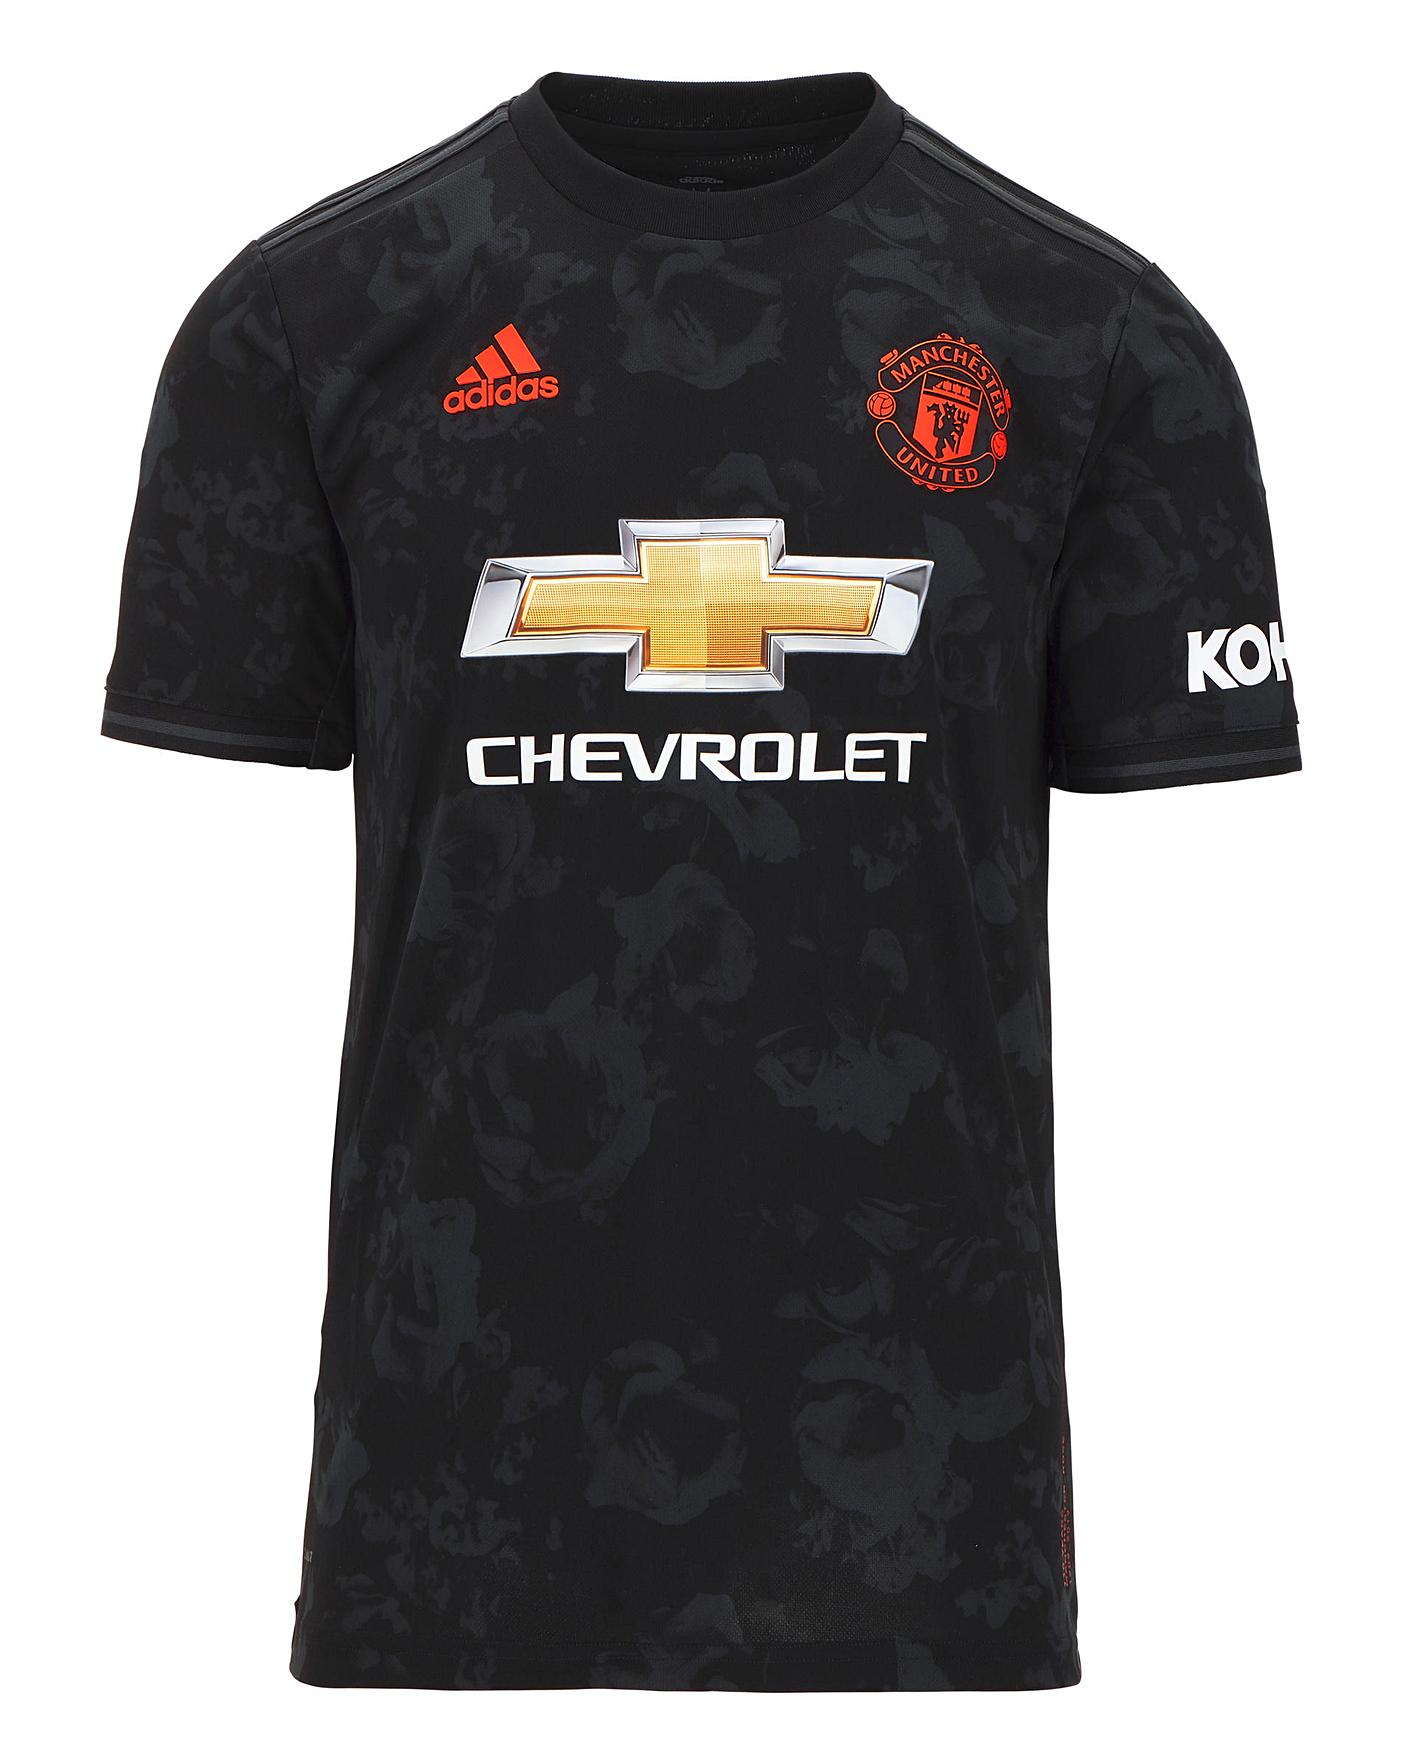 manchester united jersey 3rd